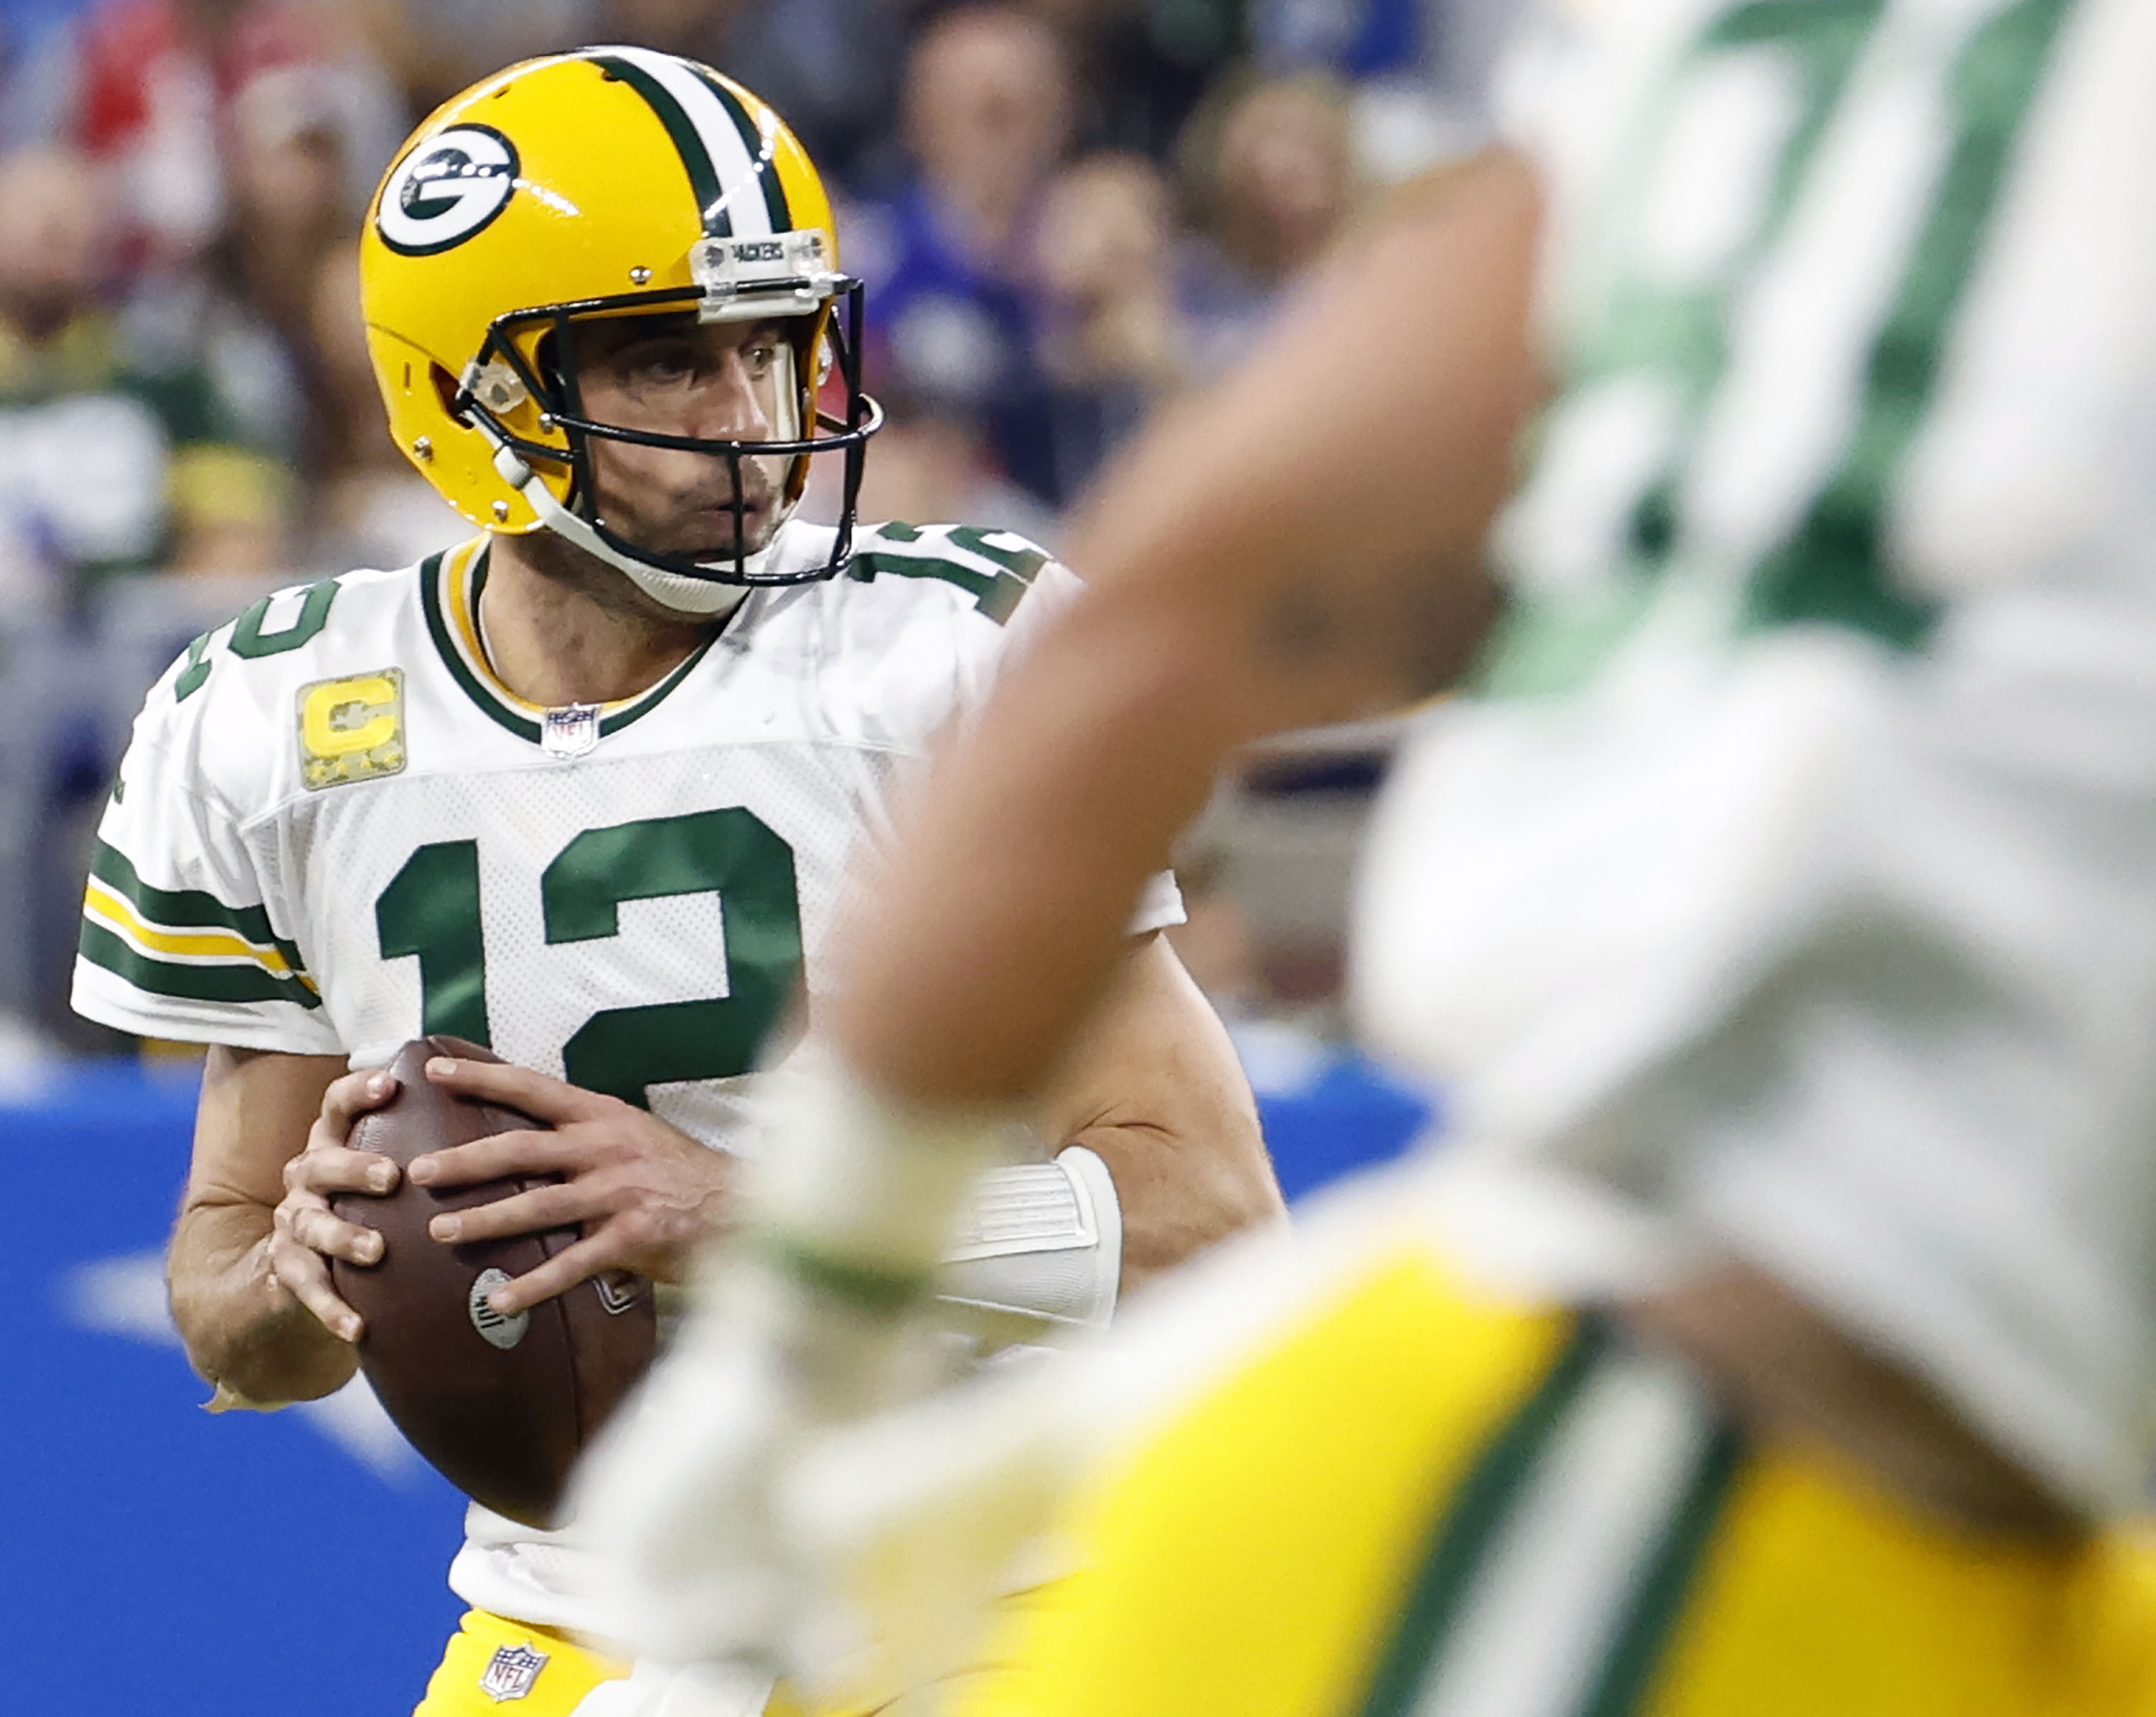 AP source: Jets agree on deal to acquire Aaron Rodgers